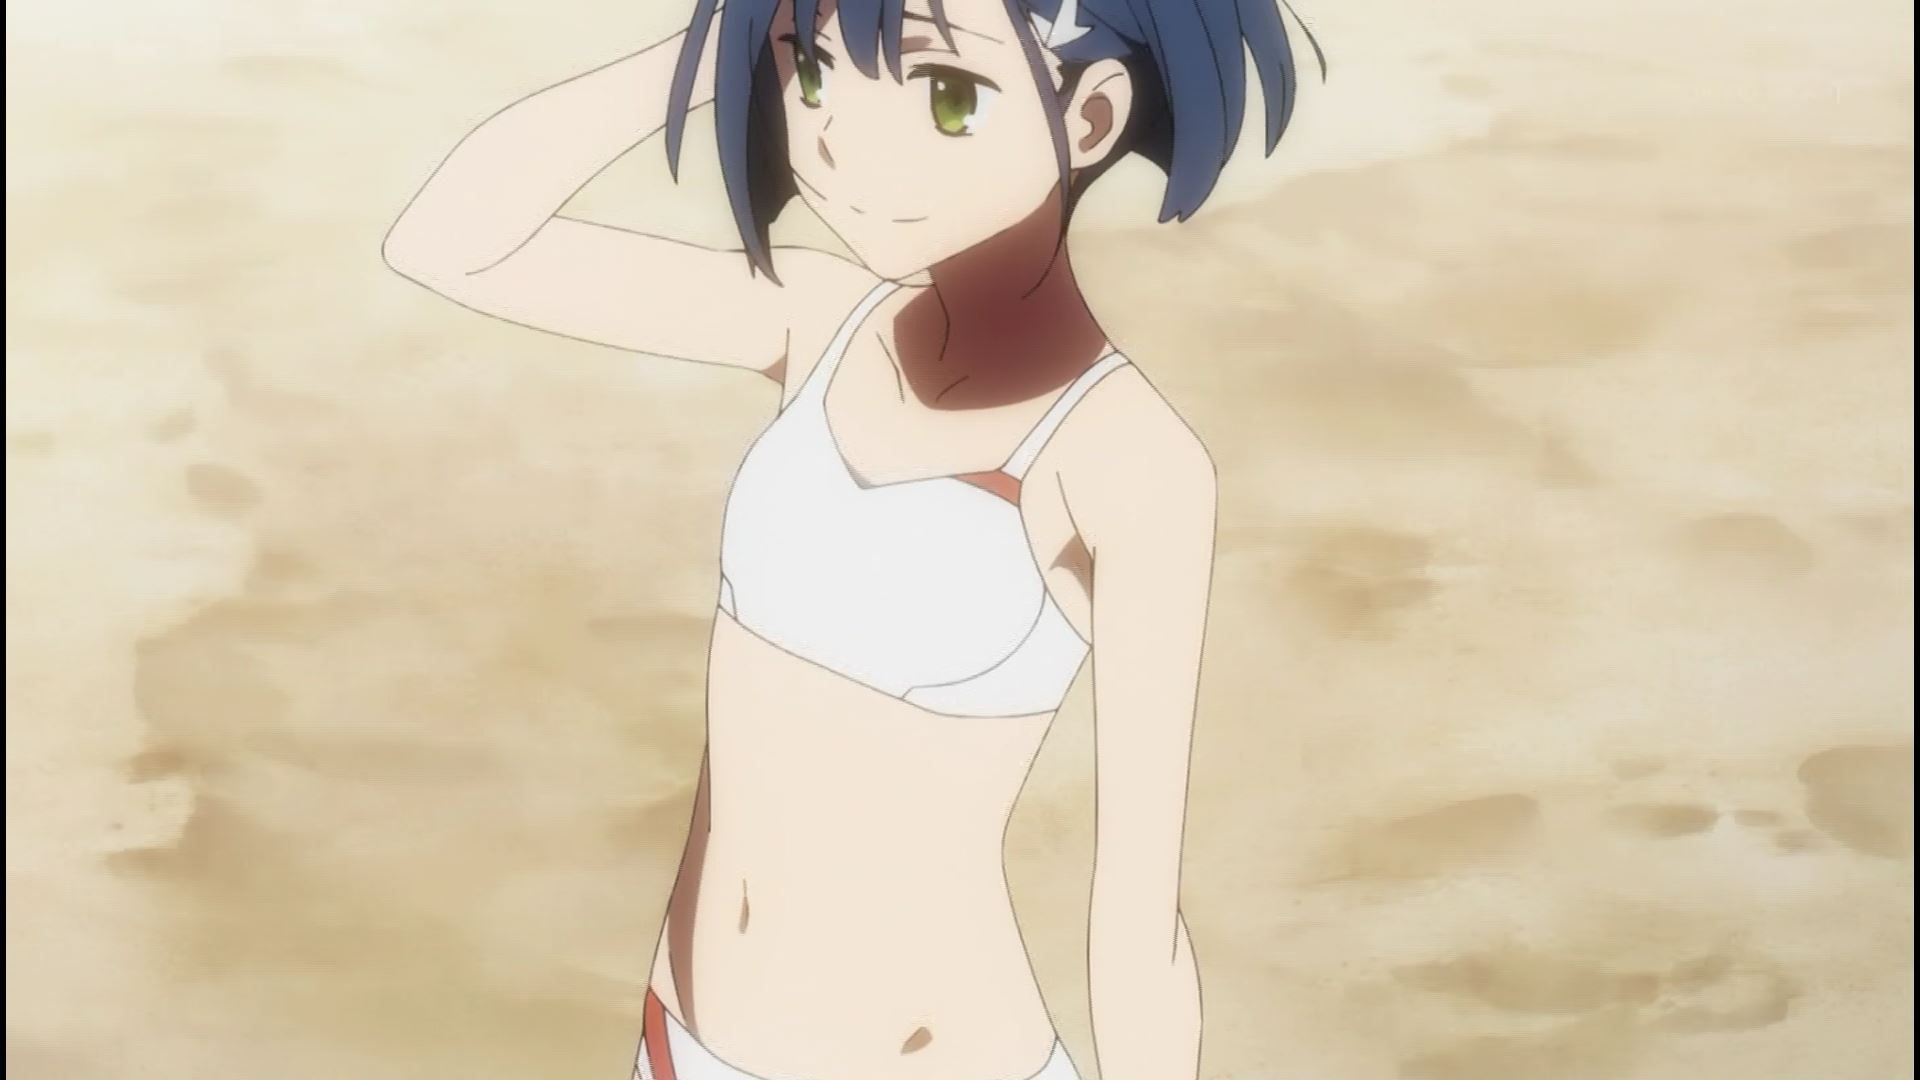 Anime [Darling in the franc kiss] seven girls erotic breasts and buttocks swimsuit times in the story! 3